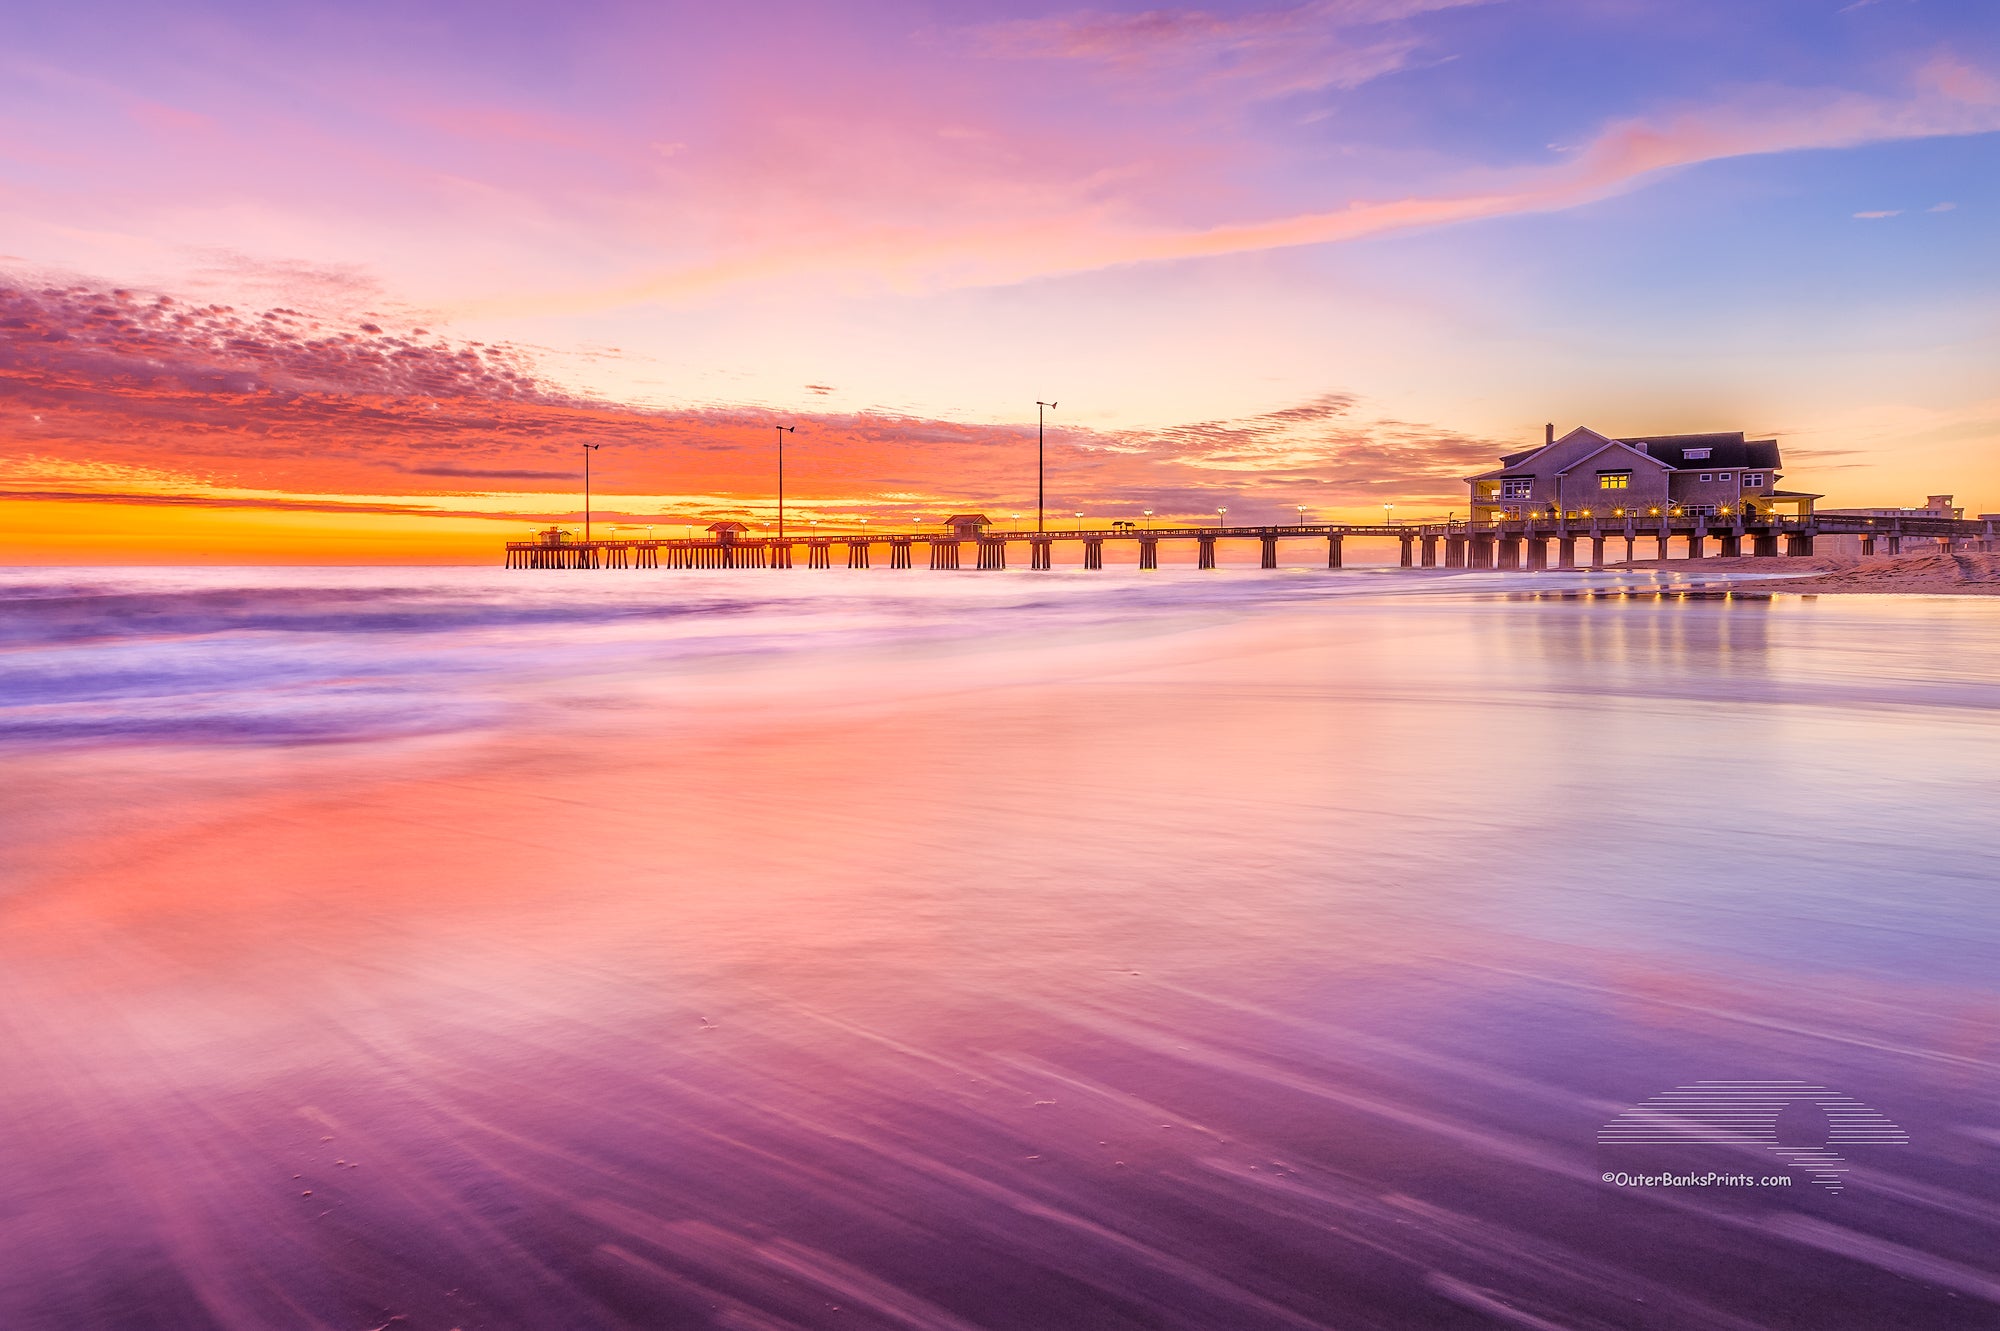 Sunrise colors reflect off shallow waves as they slide back into the sea at Jennette's Pier.